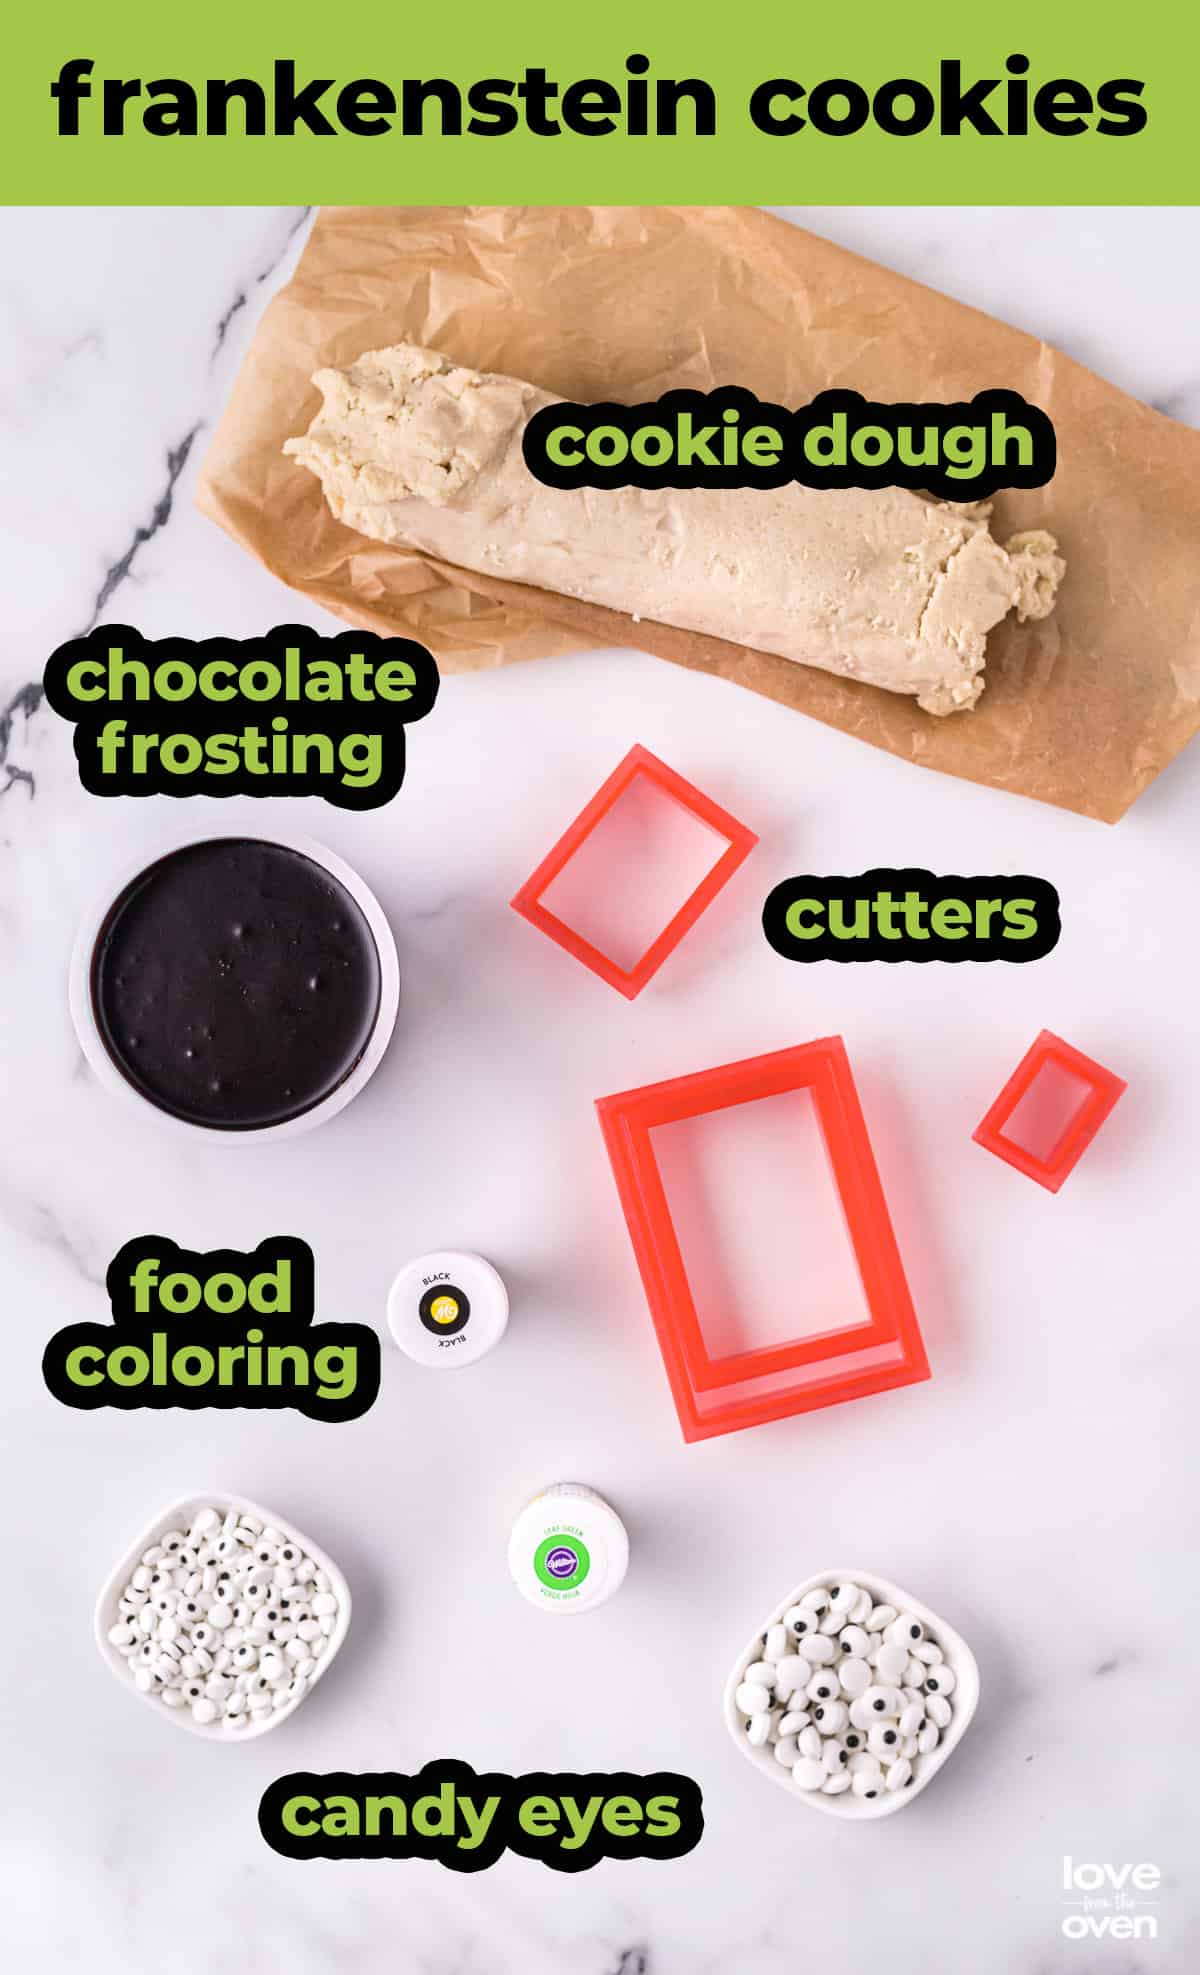 Ingredients to make halloween cookies all laid out.